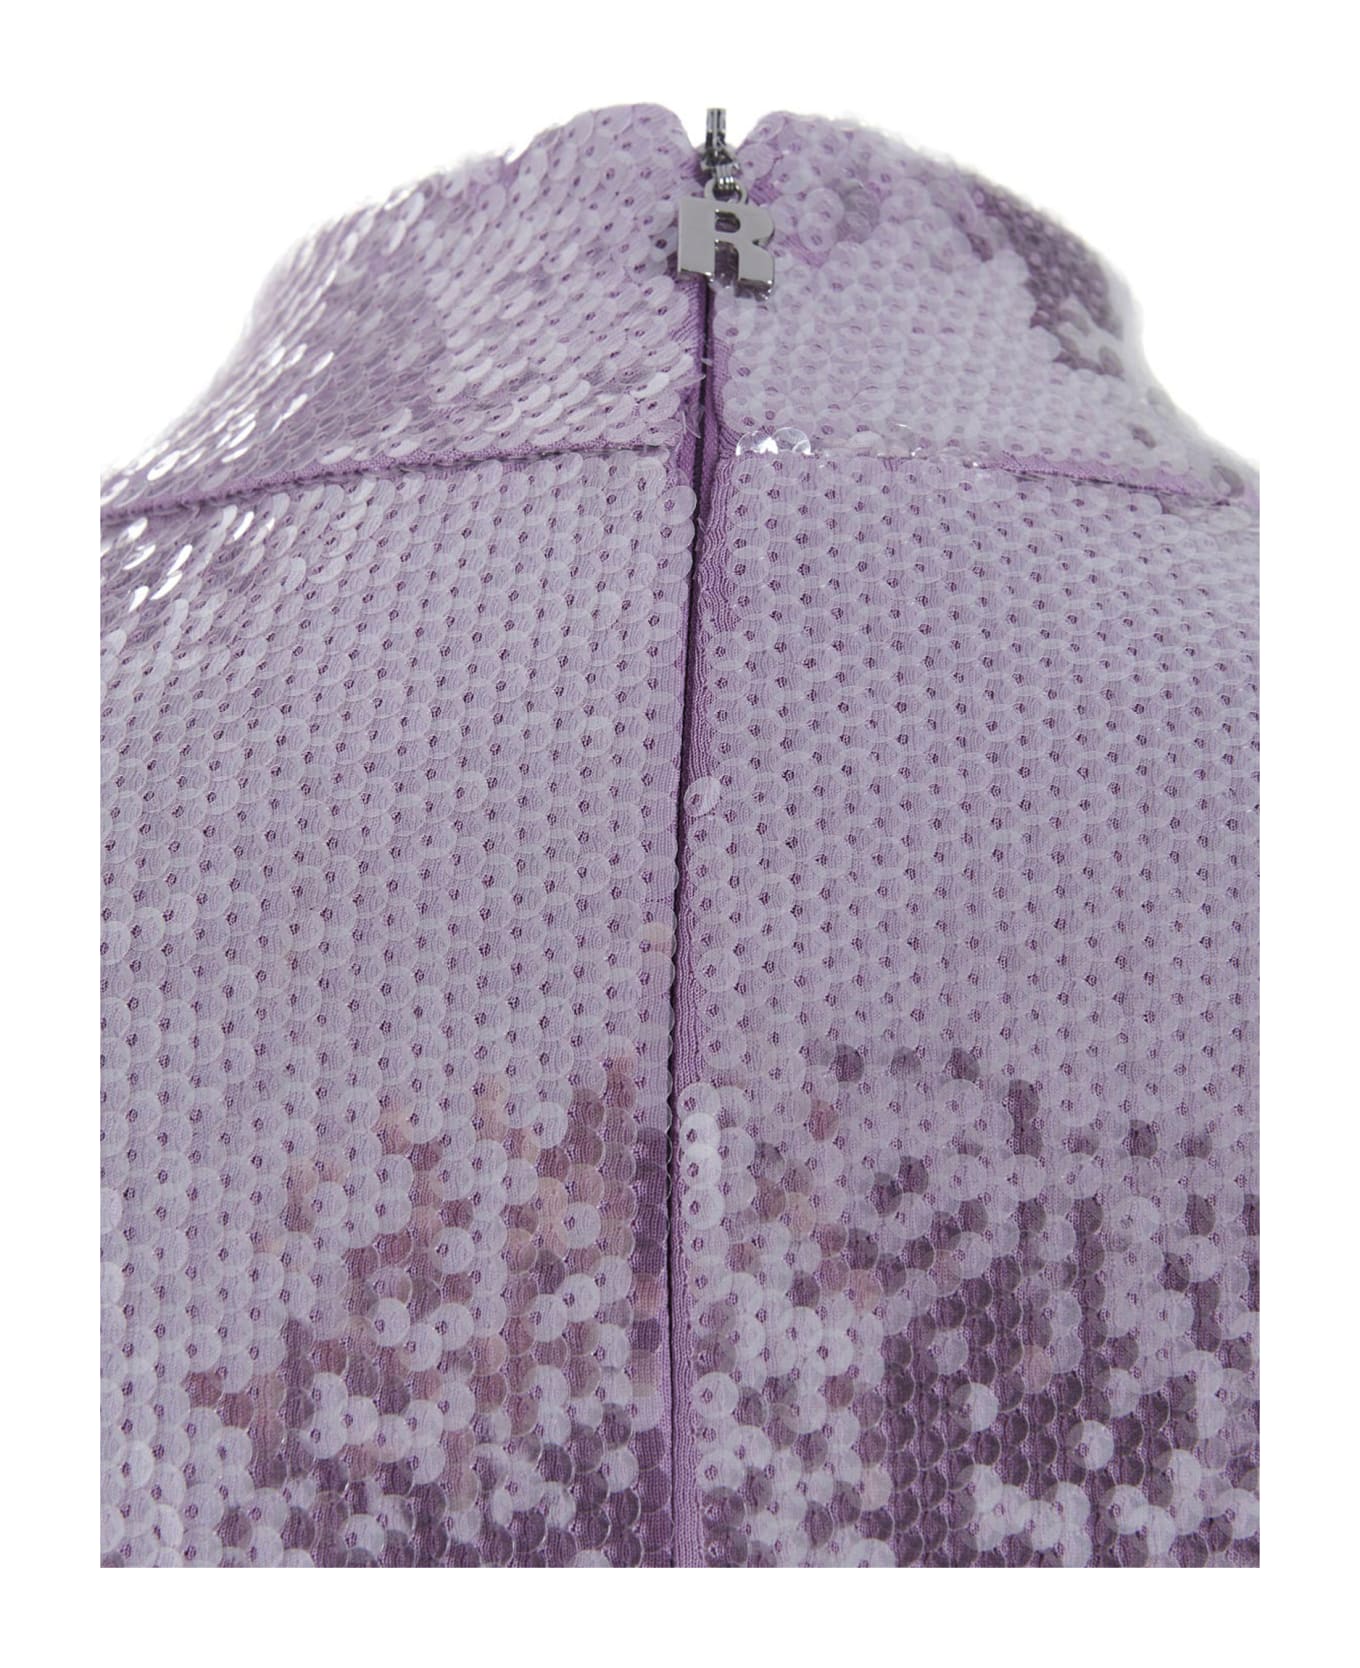 Rotate by Birger Christensen Sequin Cropped Top - Purple